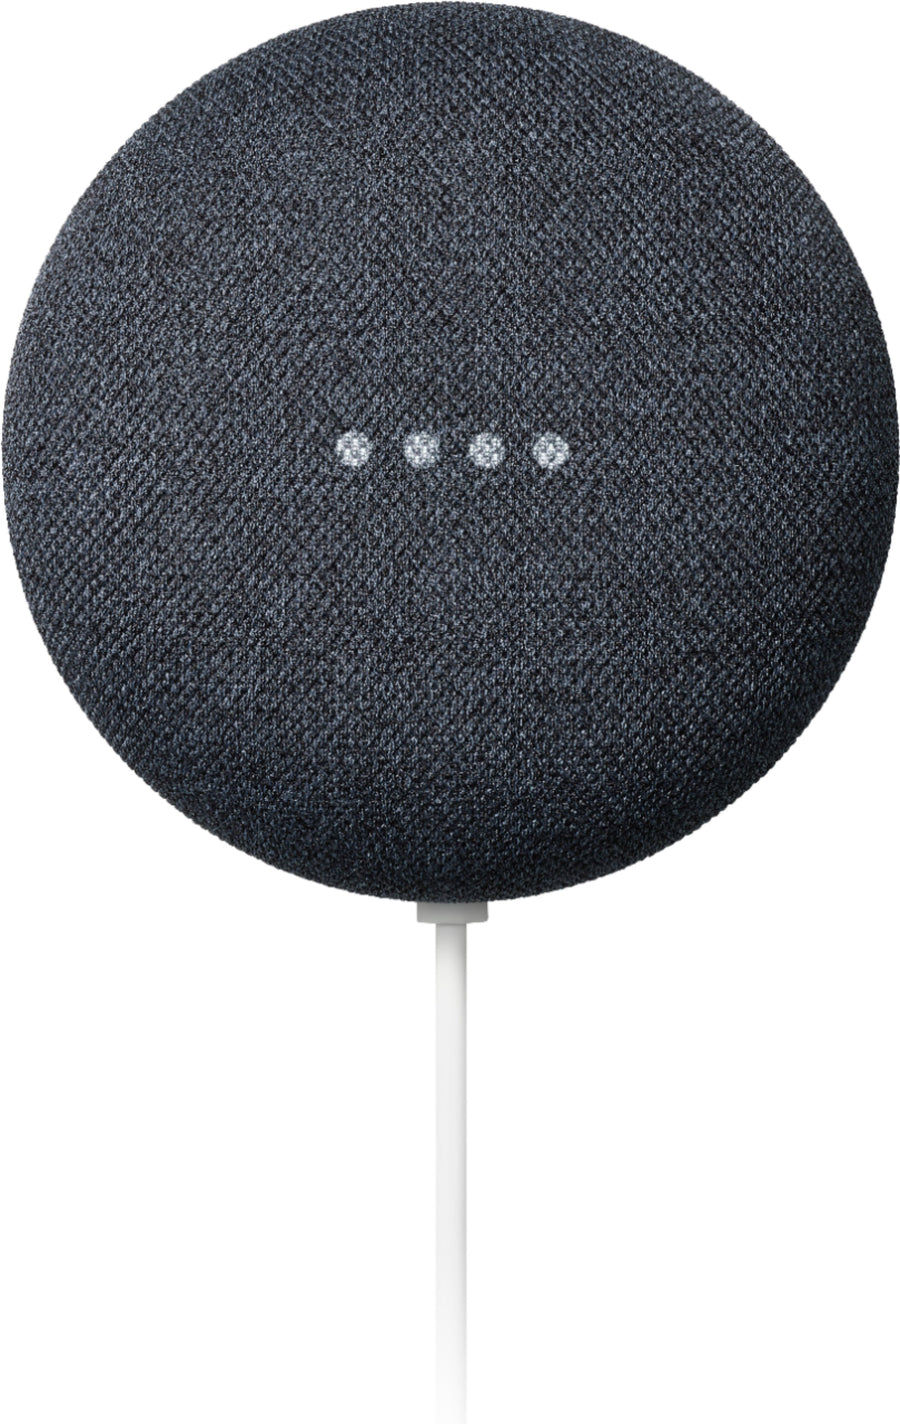 Nest Mini (2nd Generation) with Google Assistant - Charcoal_0